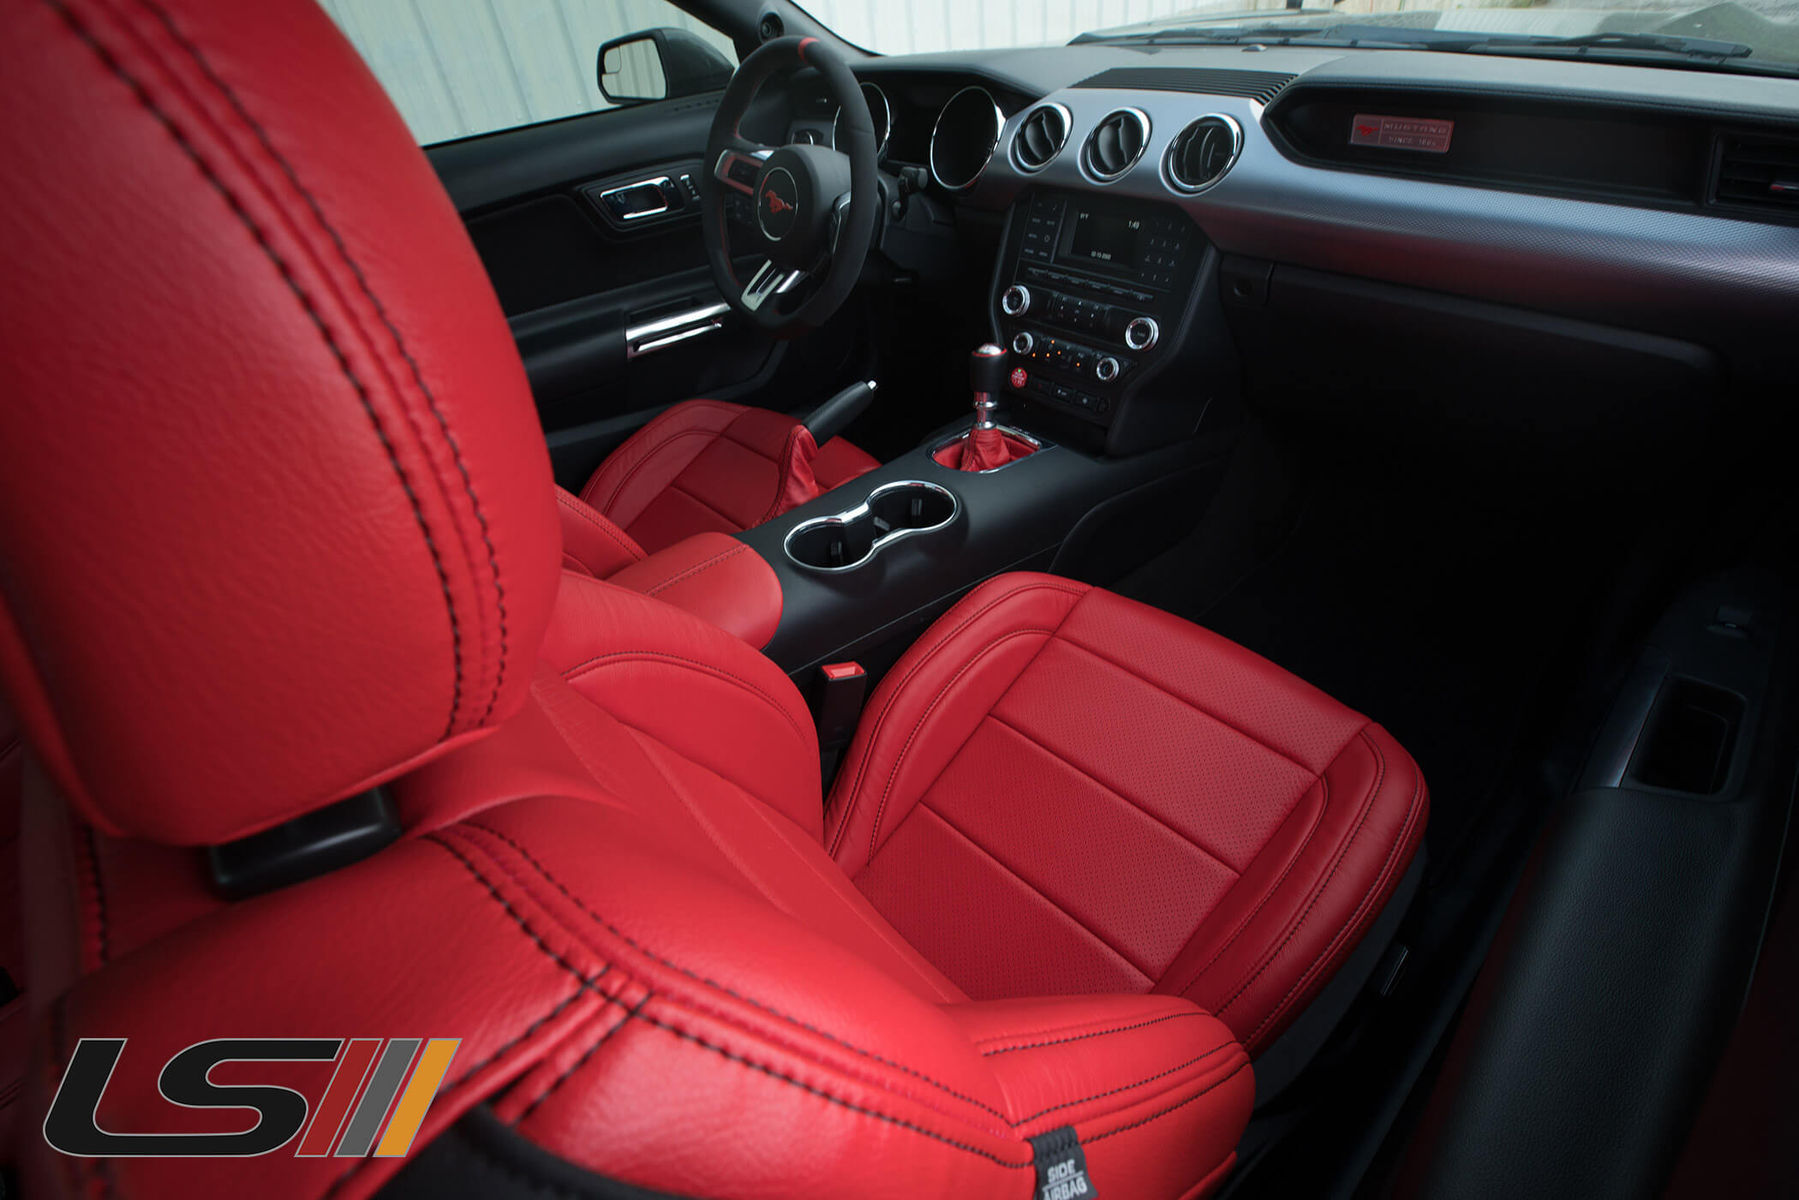 2016 Mustang Gt Leather Interior By Leatherseats Com